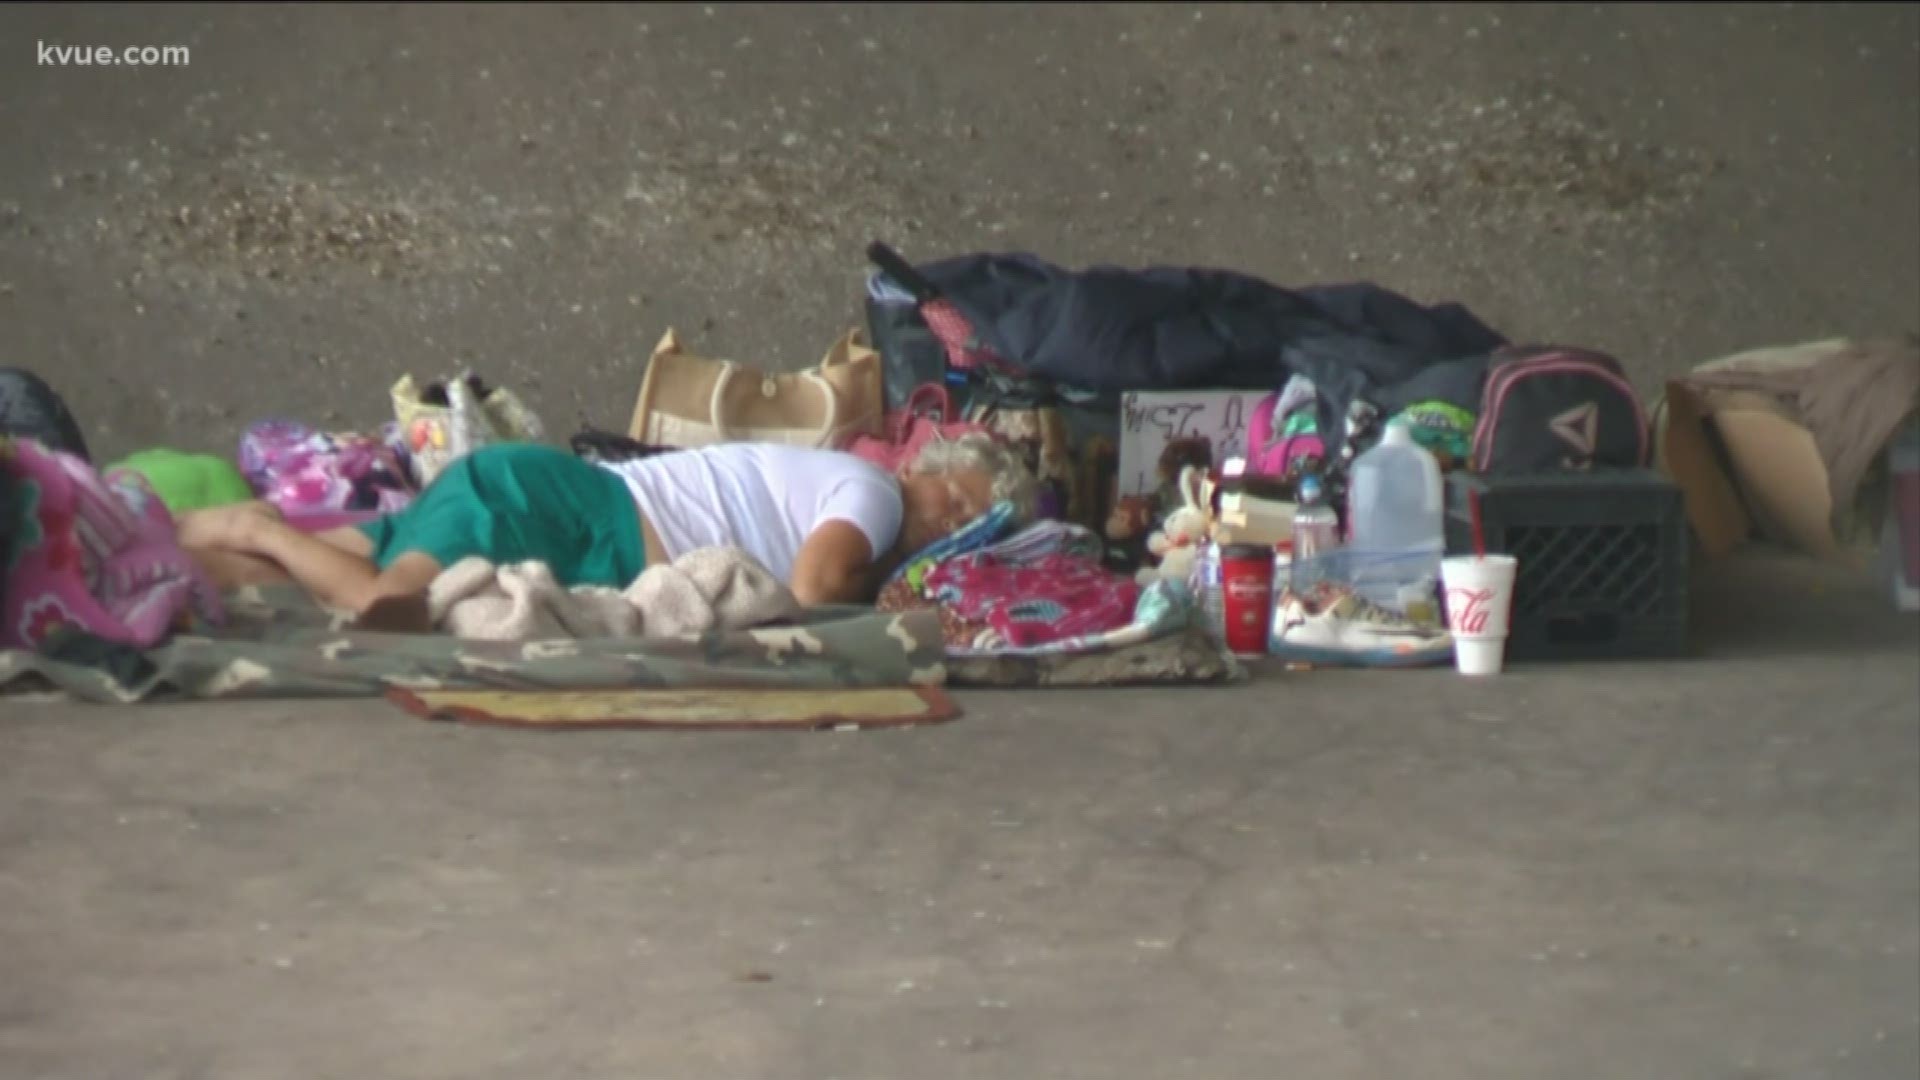 The Austin City Council will look at amending or getting rid of ordinances that deal with panhandling, sitting in the public right-of-way and camping.